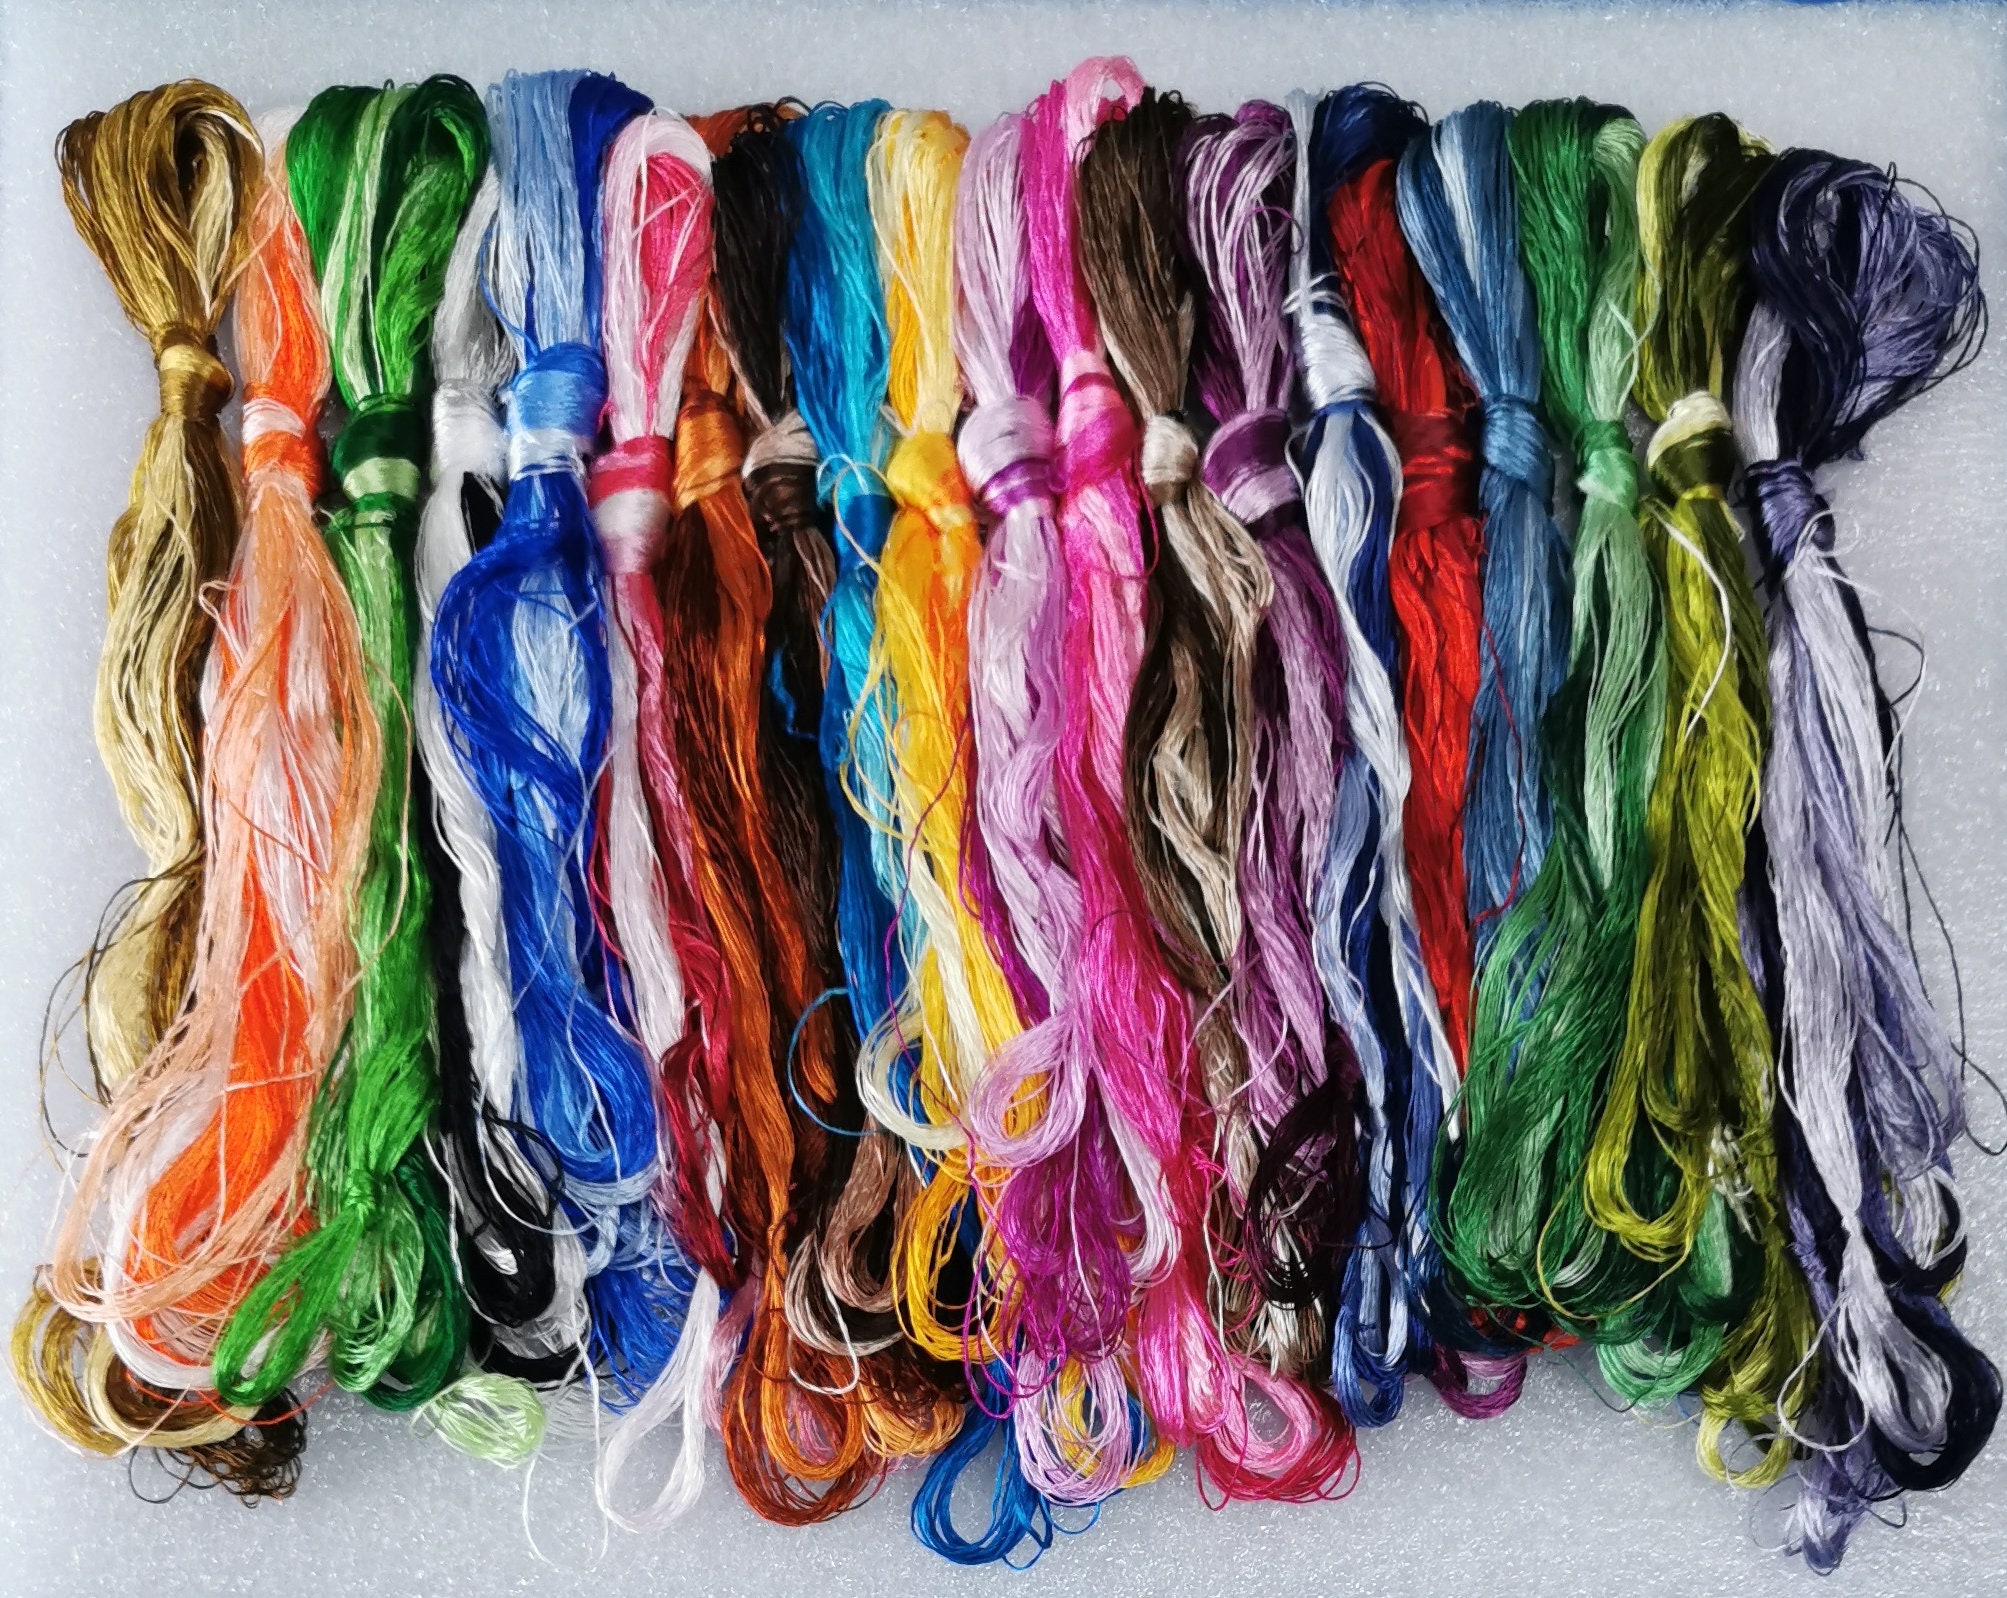 50 Colors Hand-Dyed Natural Mulberry Silk Embroidery Floss Thread - China  Silk Floss and Silk Thread price